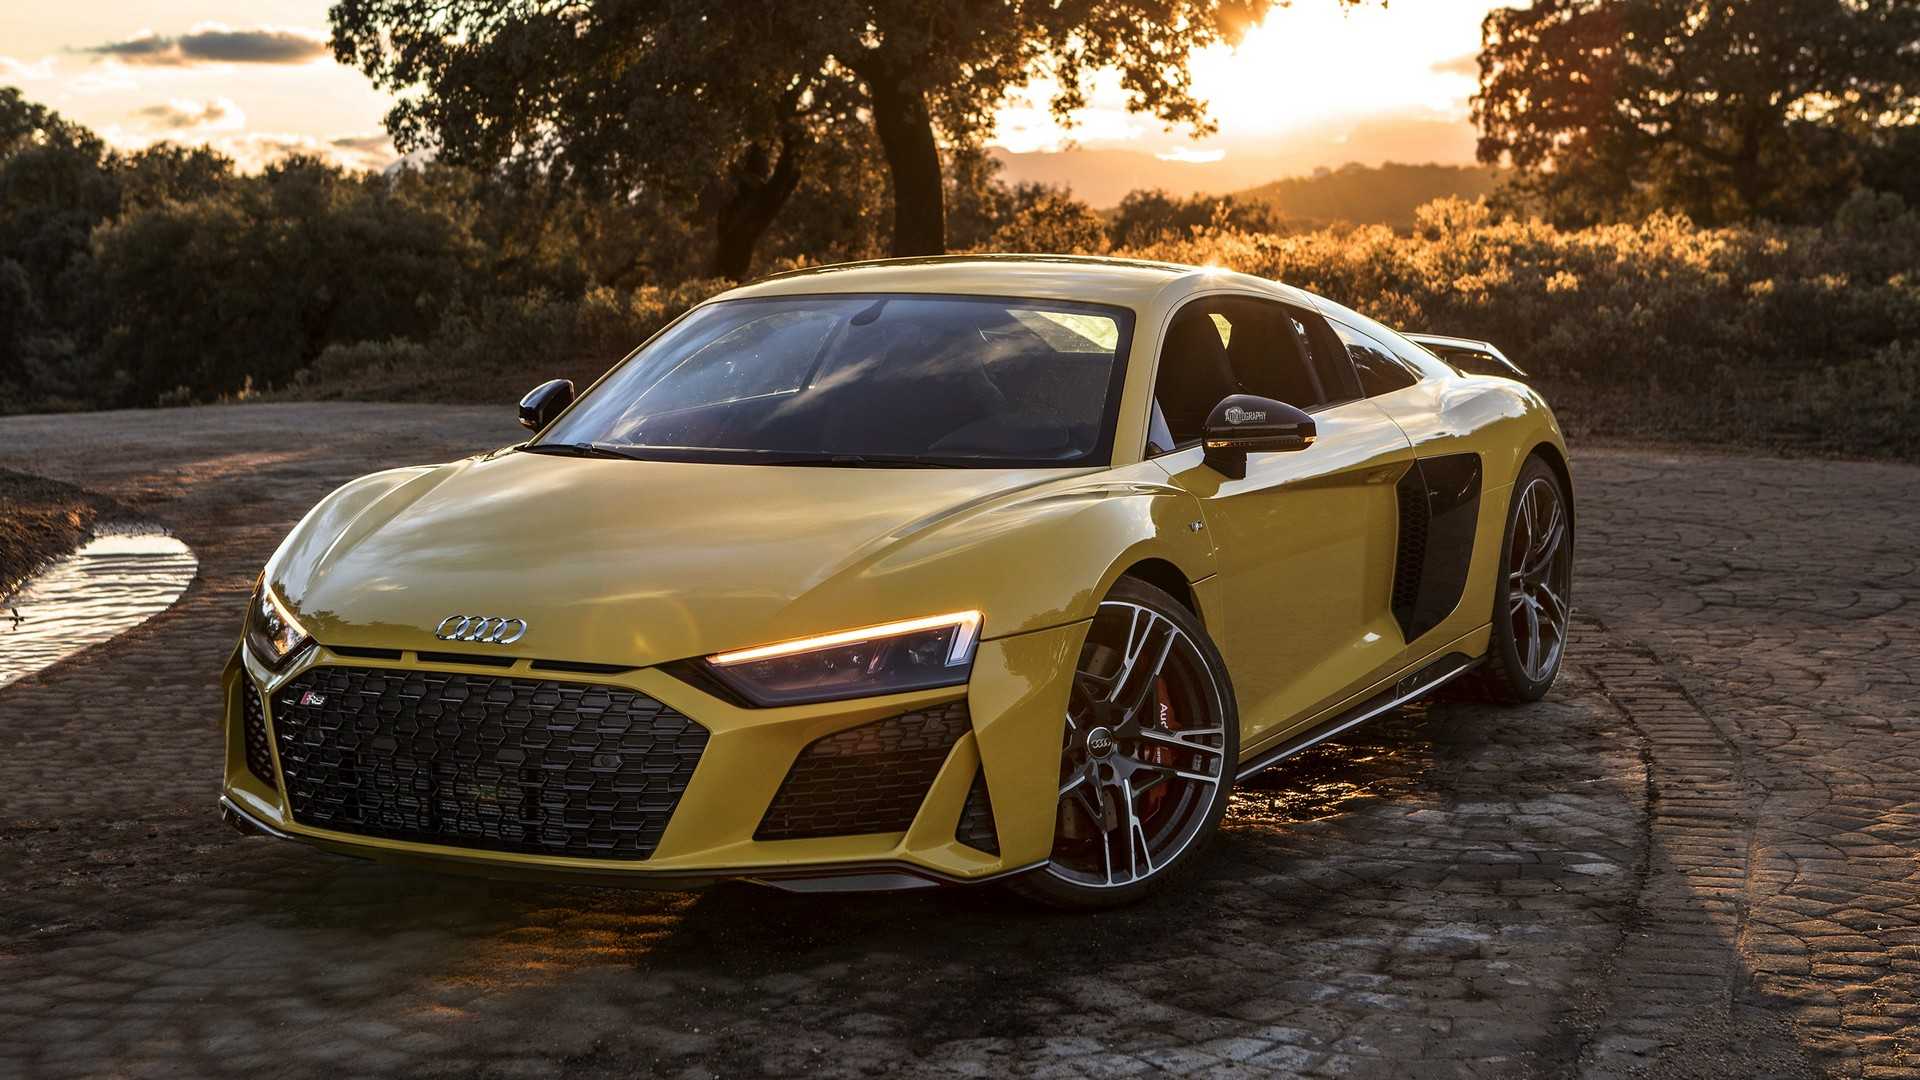 Audi R8 V10 Performance Looks Brutal in Yellow